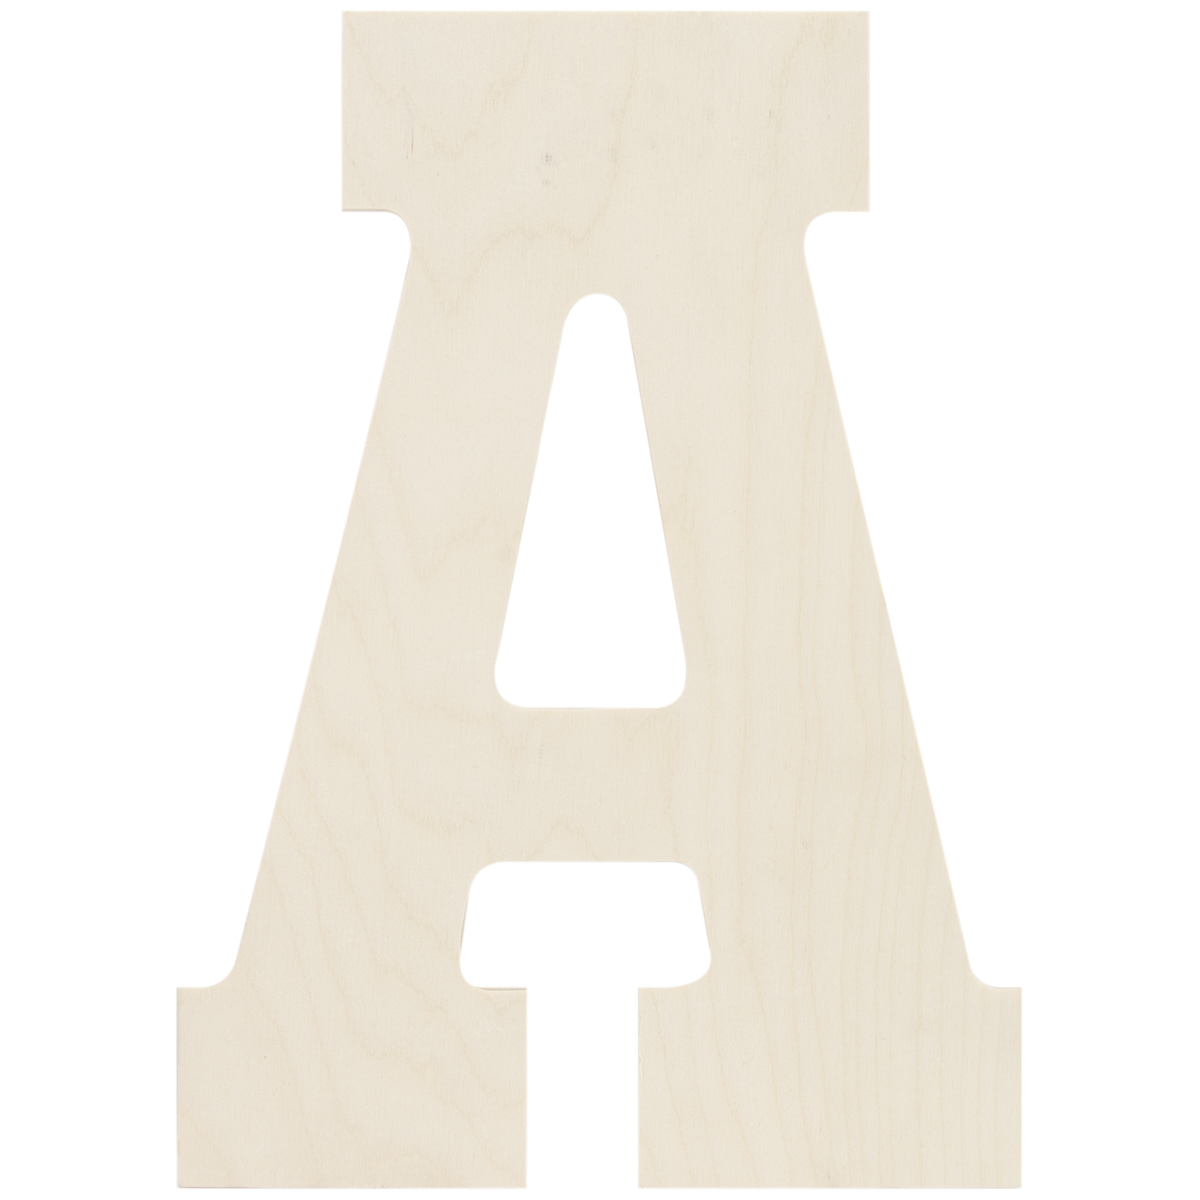 MPI WOOD PRODUCTS Baltic Birch Collegiate Font Letters and Numbers, 13.5" - image 2 of 2